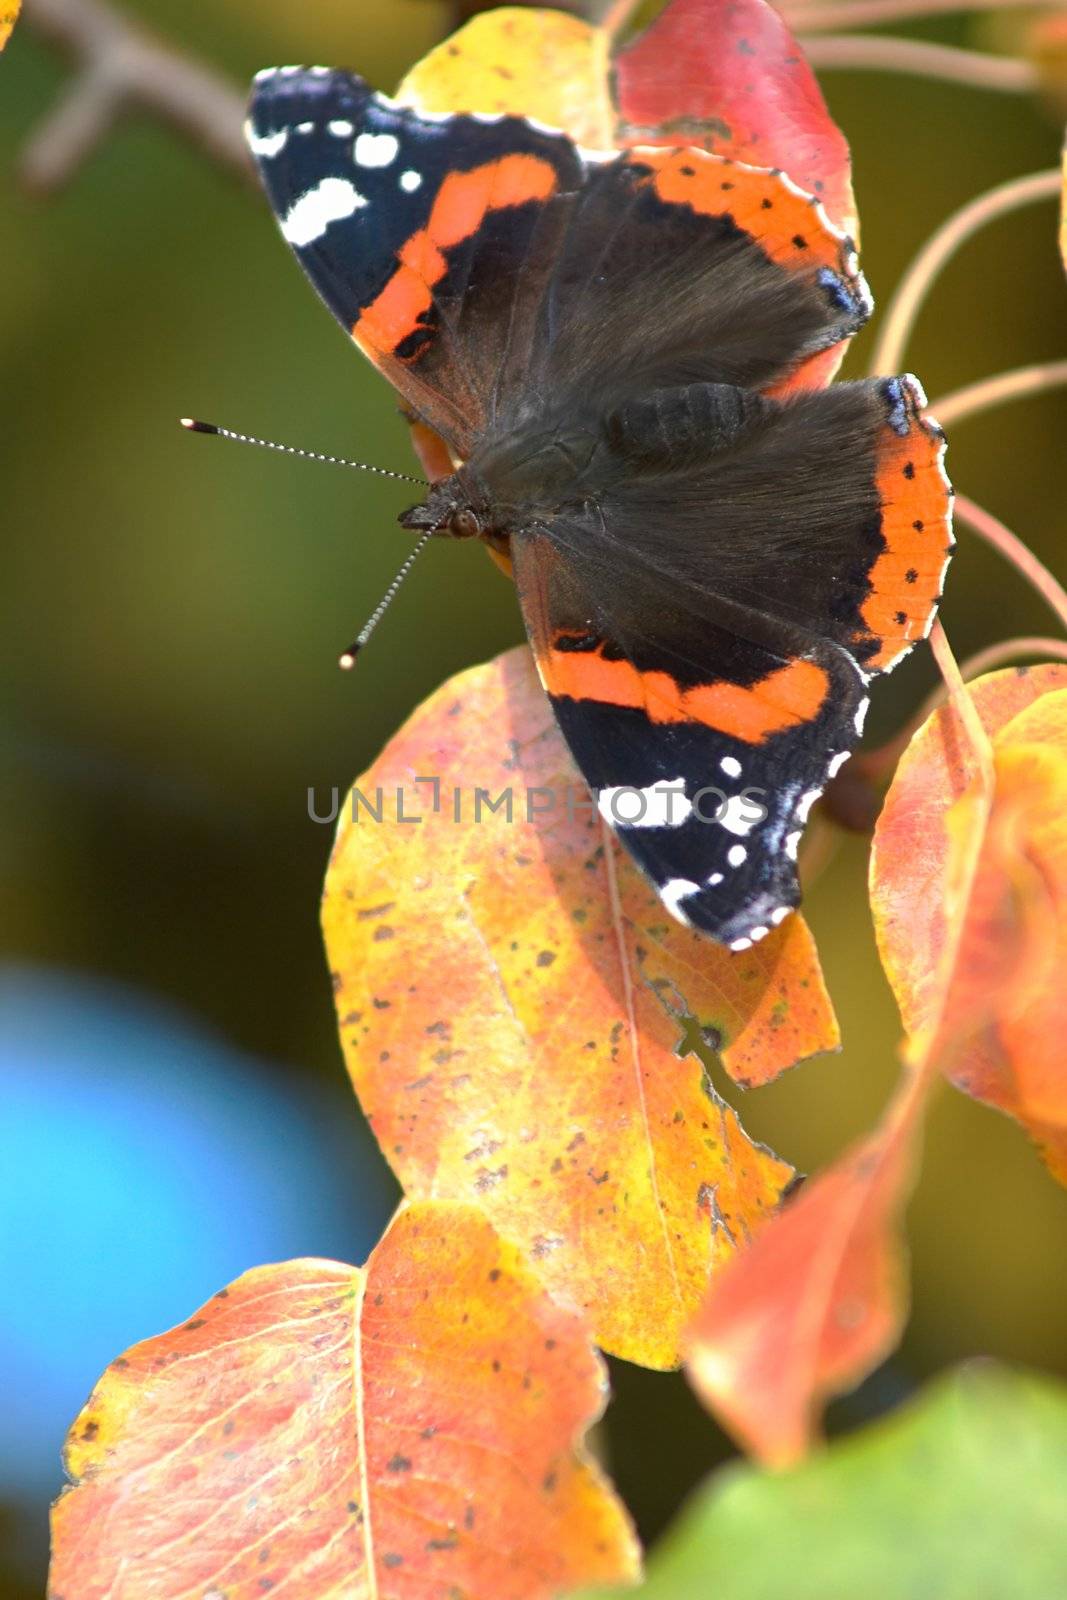 A brittle butterfly sitting amongst leaves